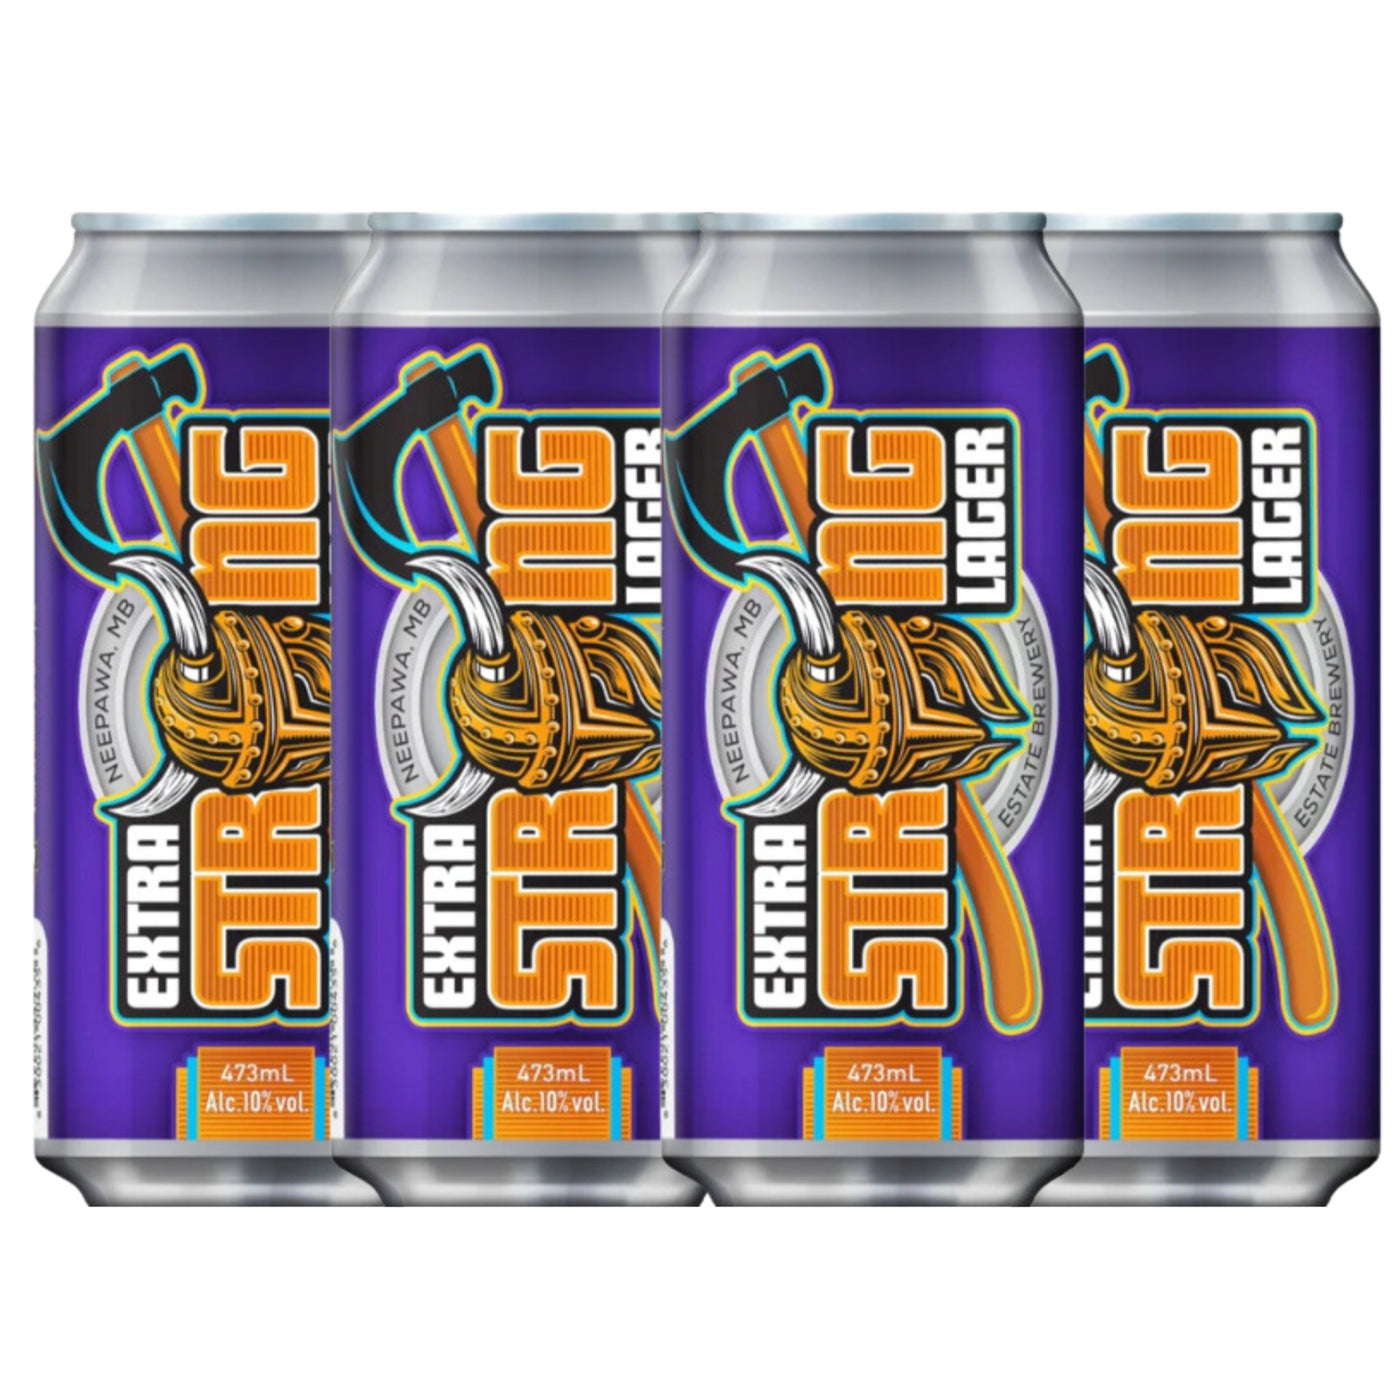 Extra Strong 10% Lager - Farmery Estate Brewing Company Inc.-Core Beers